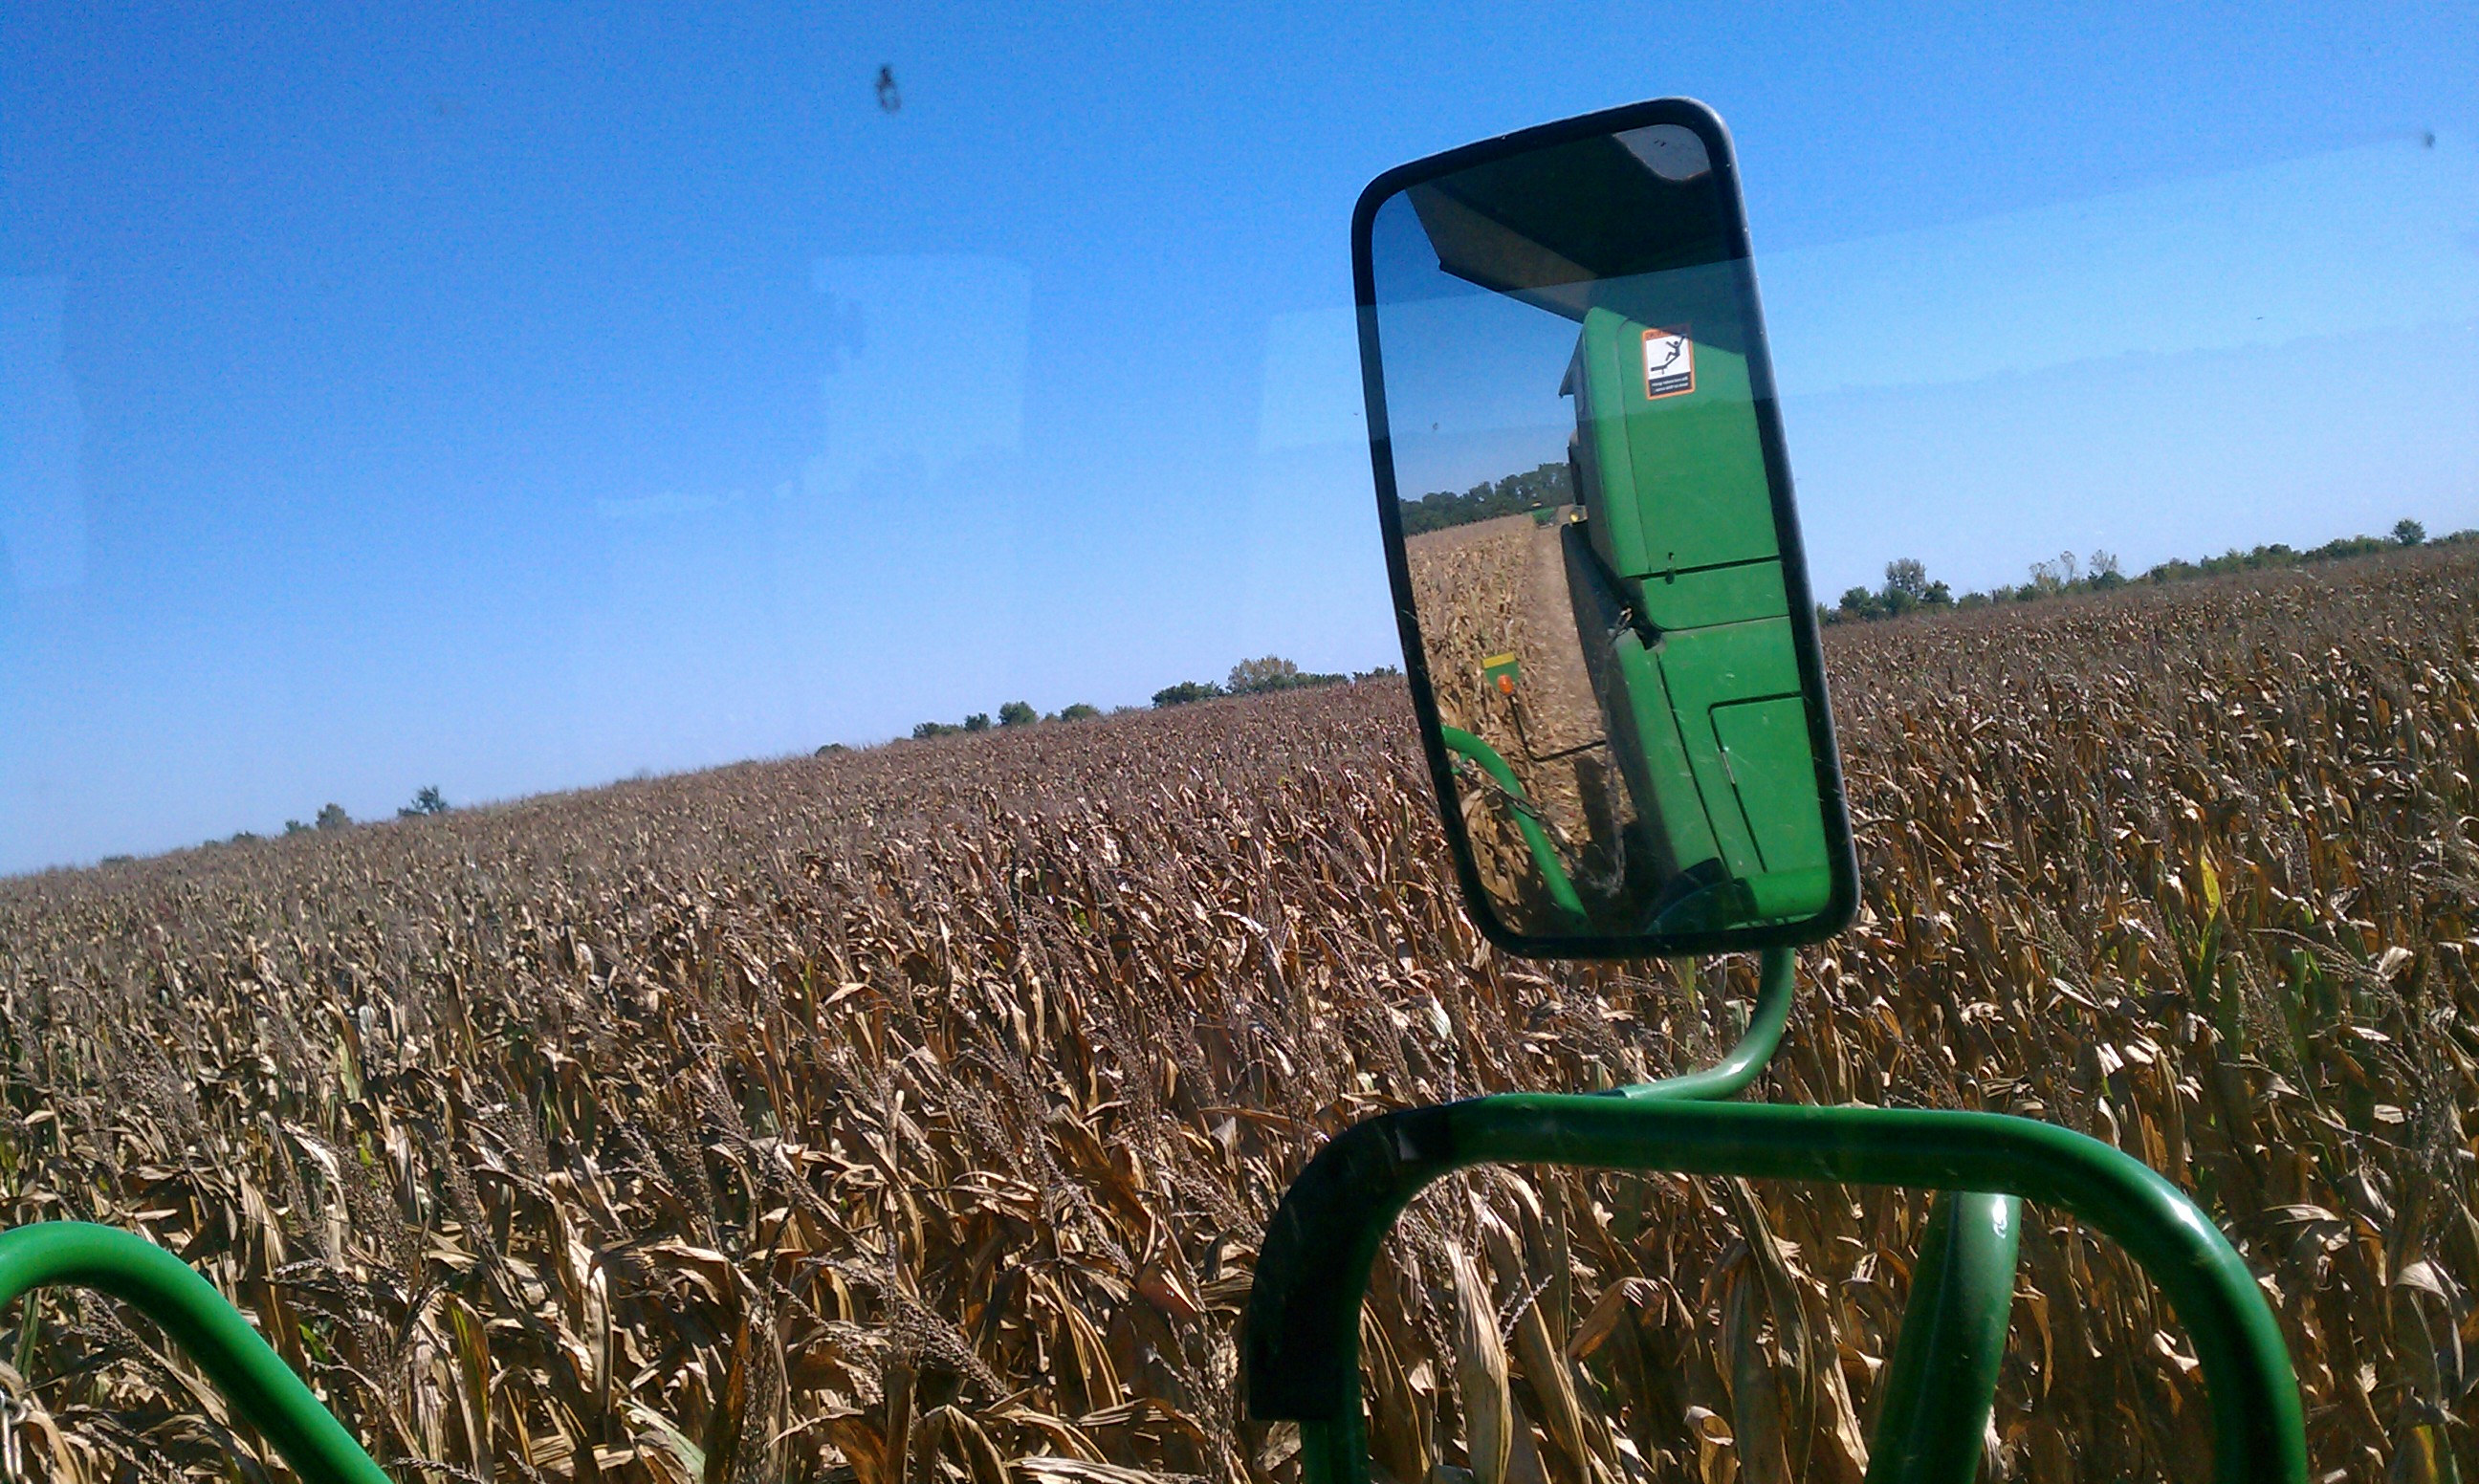 Combine monster eating the field